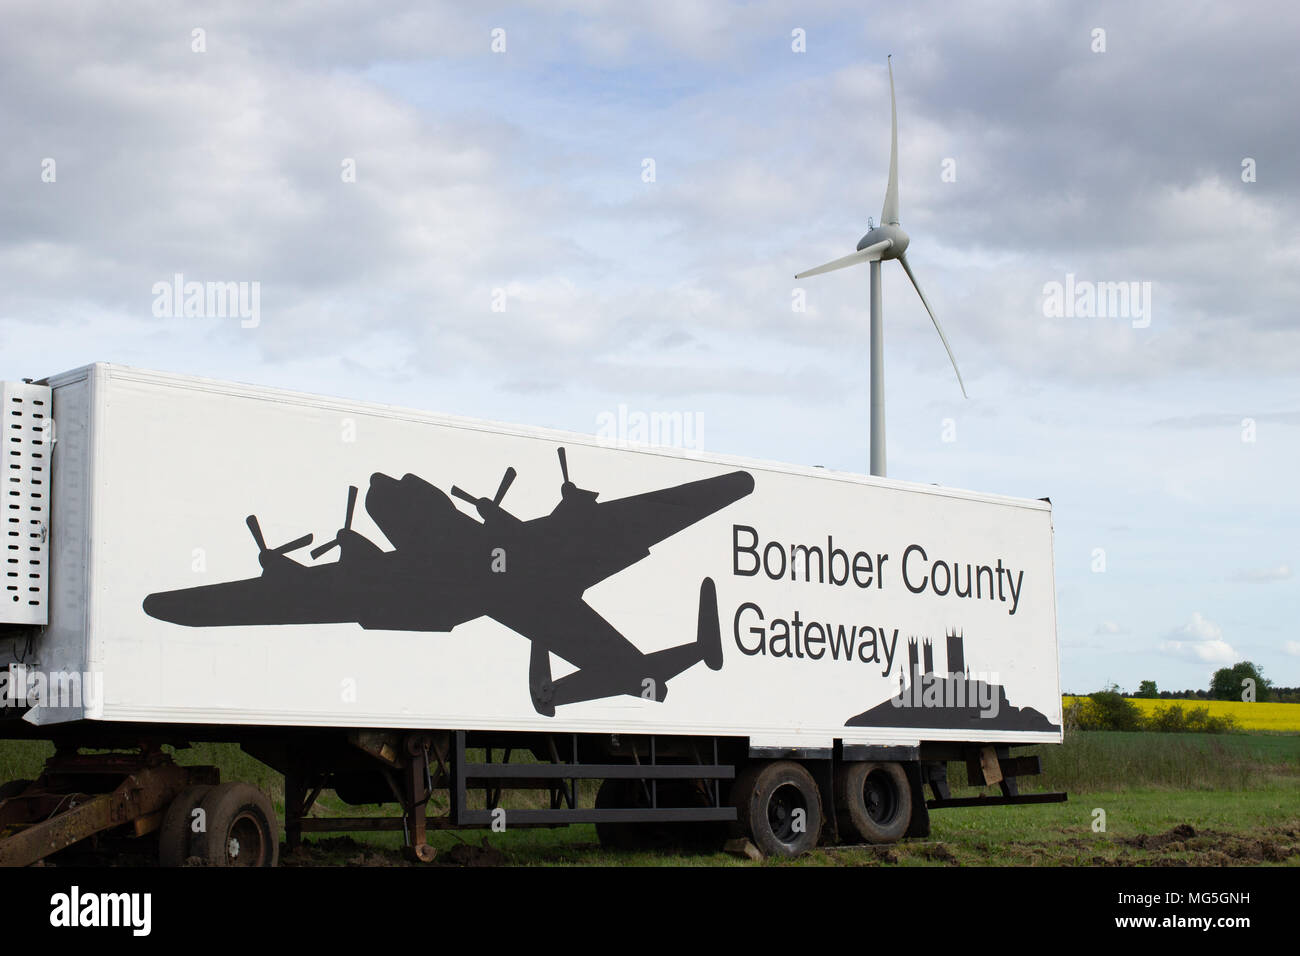 Bomber County Gateway location on the outskirts of Newark on the way to Lincoln just off the A46 dual carriageway where it meets the Newark Road. Stock Photo